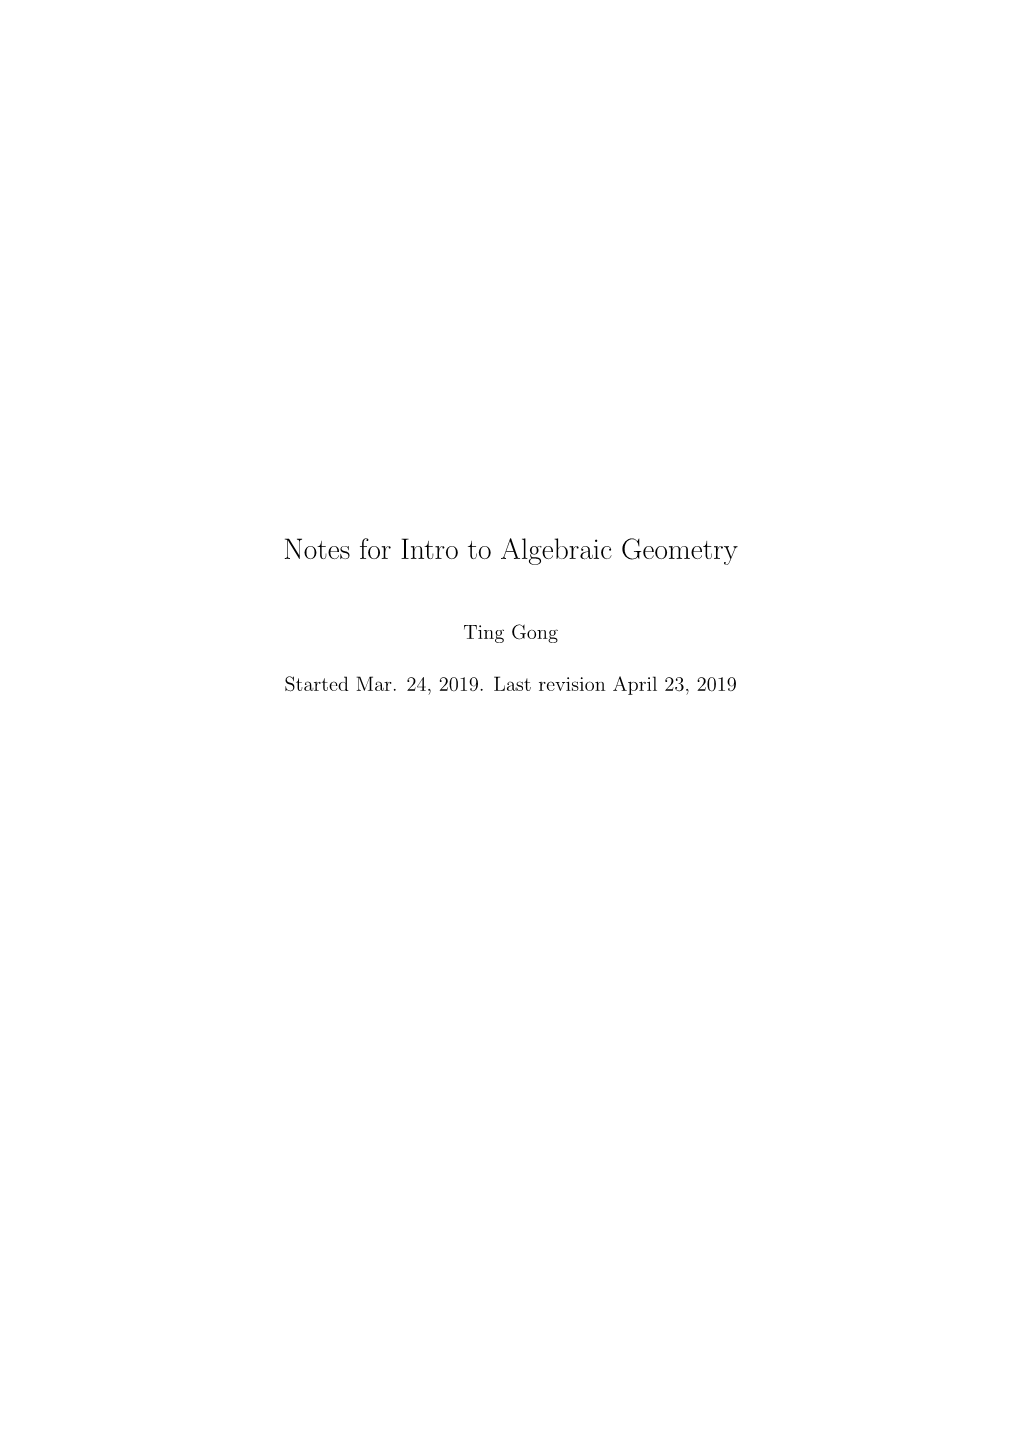 Notes for Intro to Algebraic Geometry